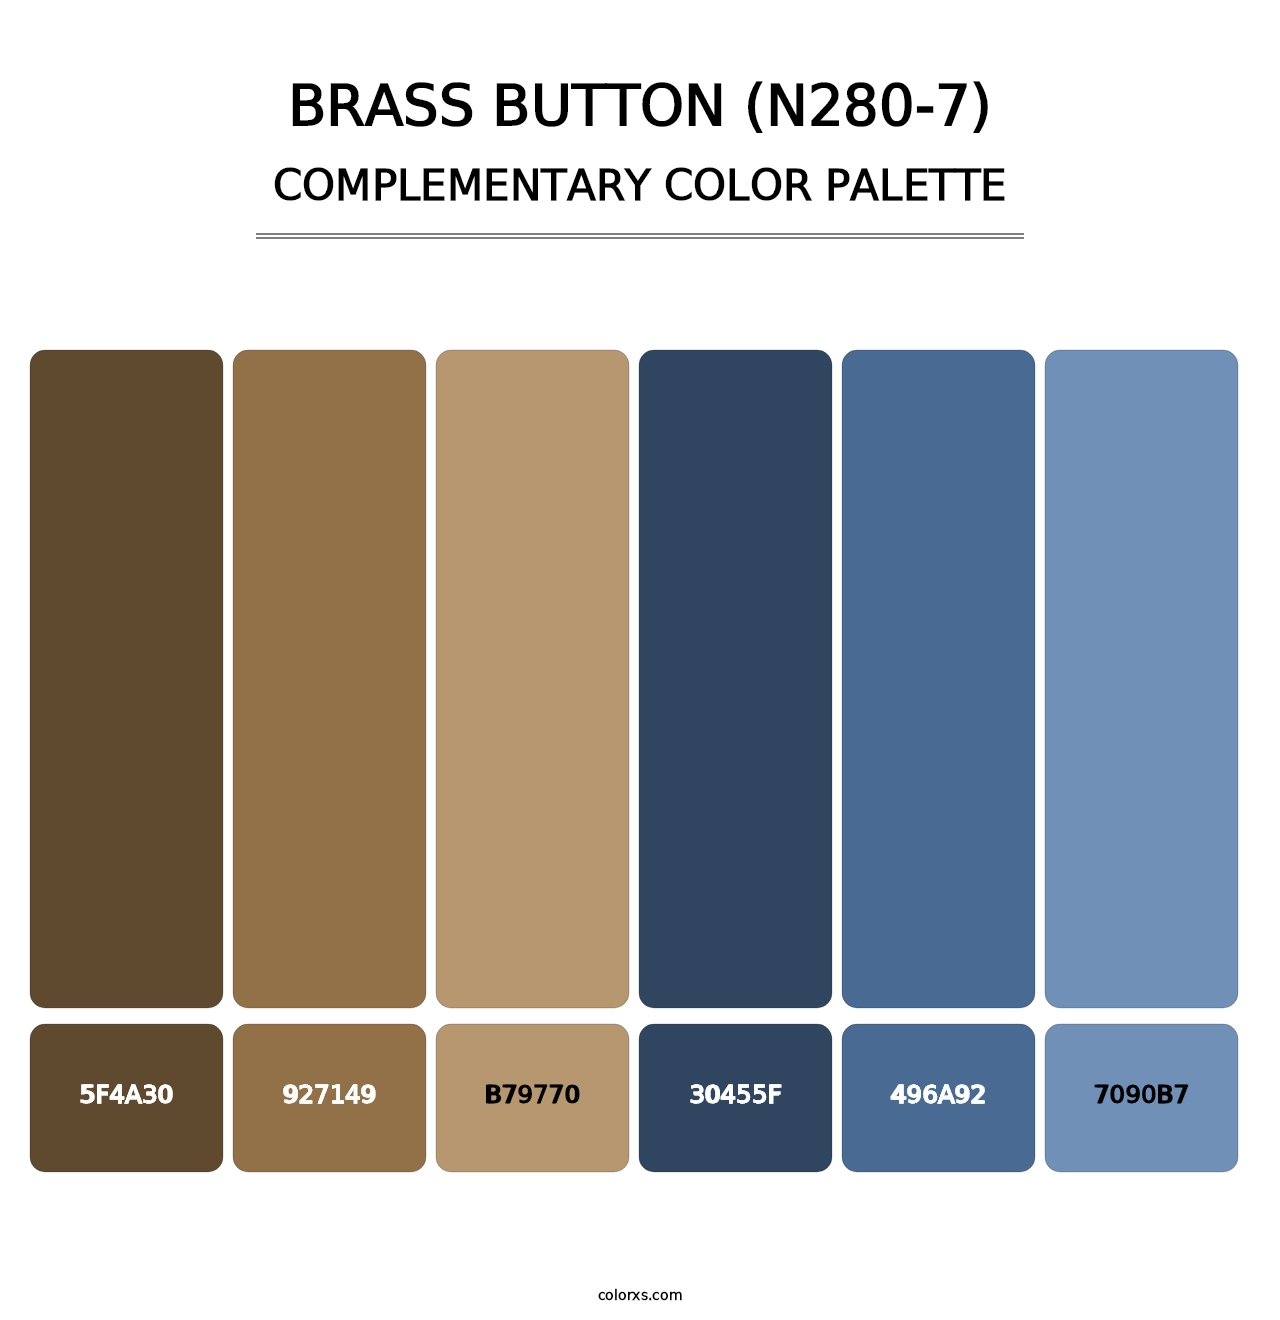 Brass Button (N280-7) - Complementary Color Palette